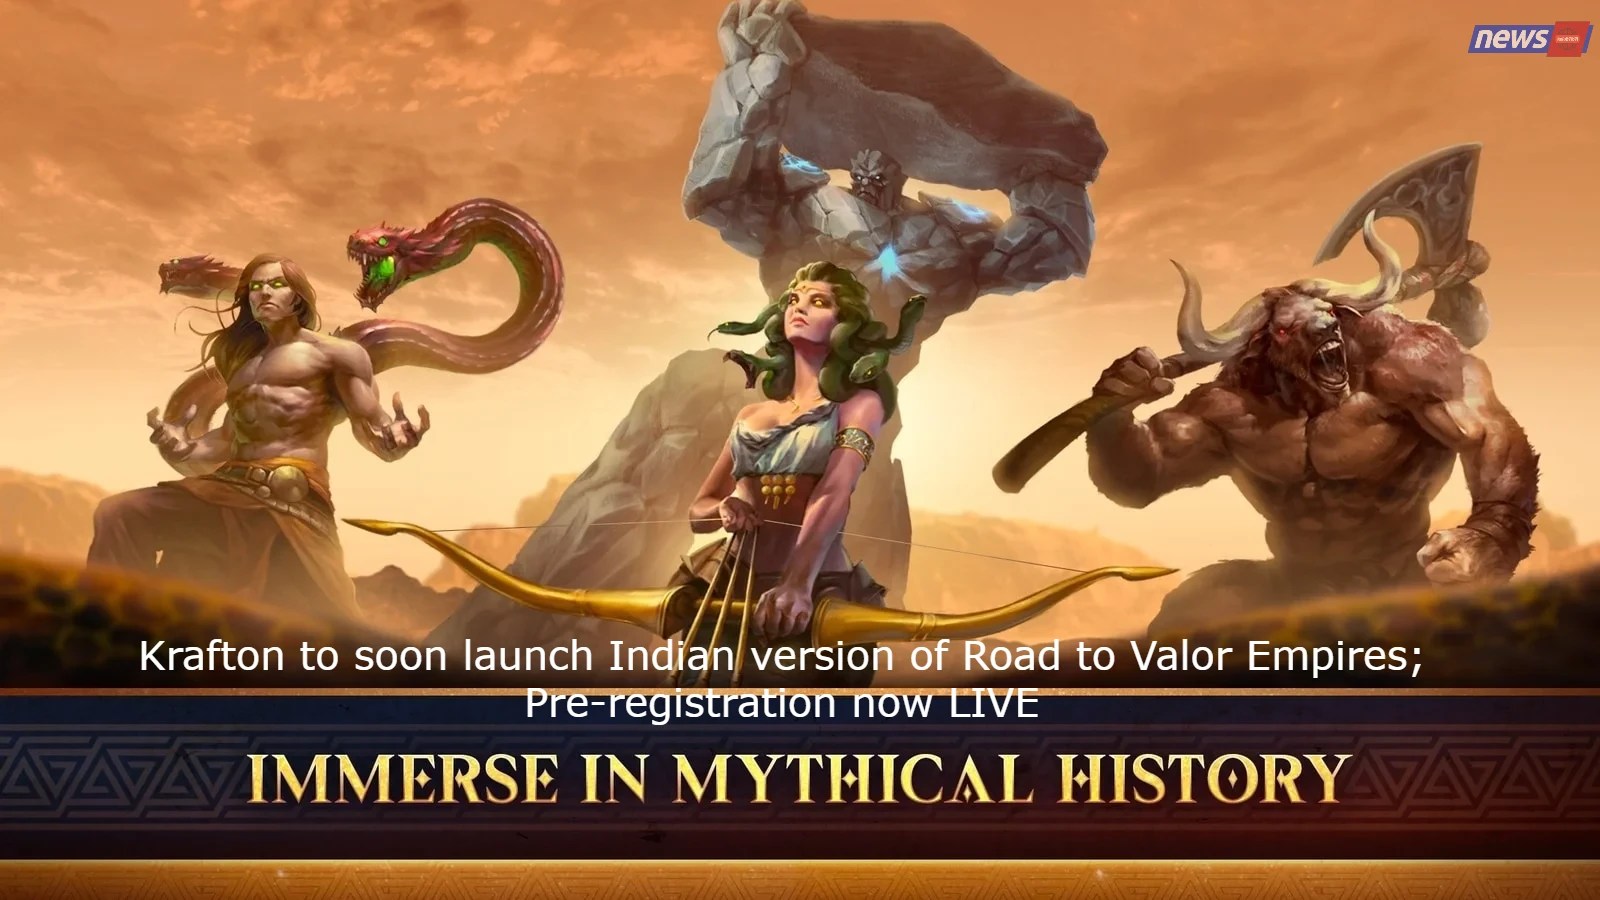 Krafton to soon launch the Indian version of Road to Valor: Empires; Pre-registration is now LIVE